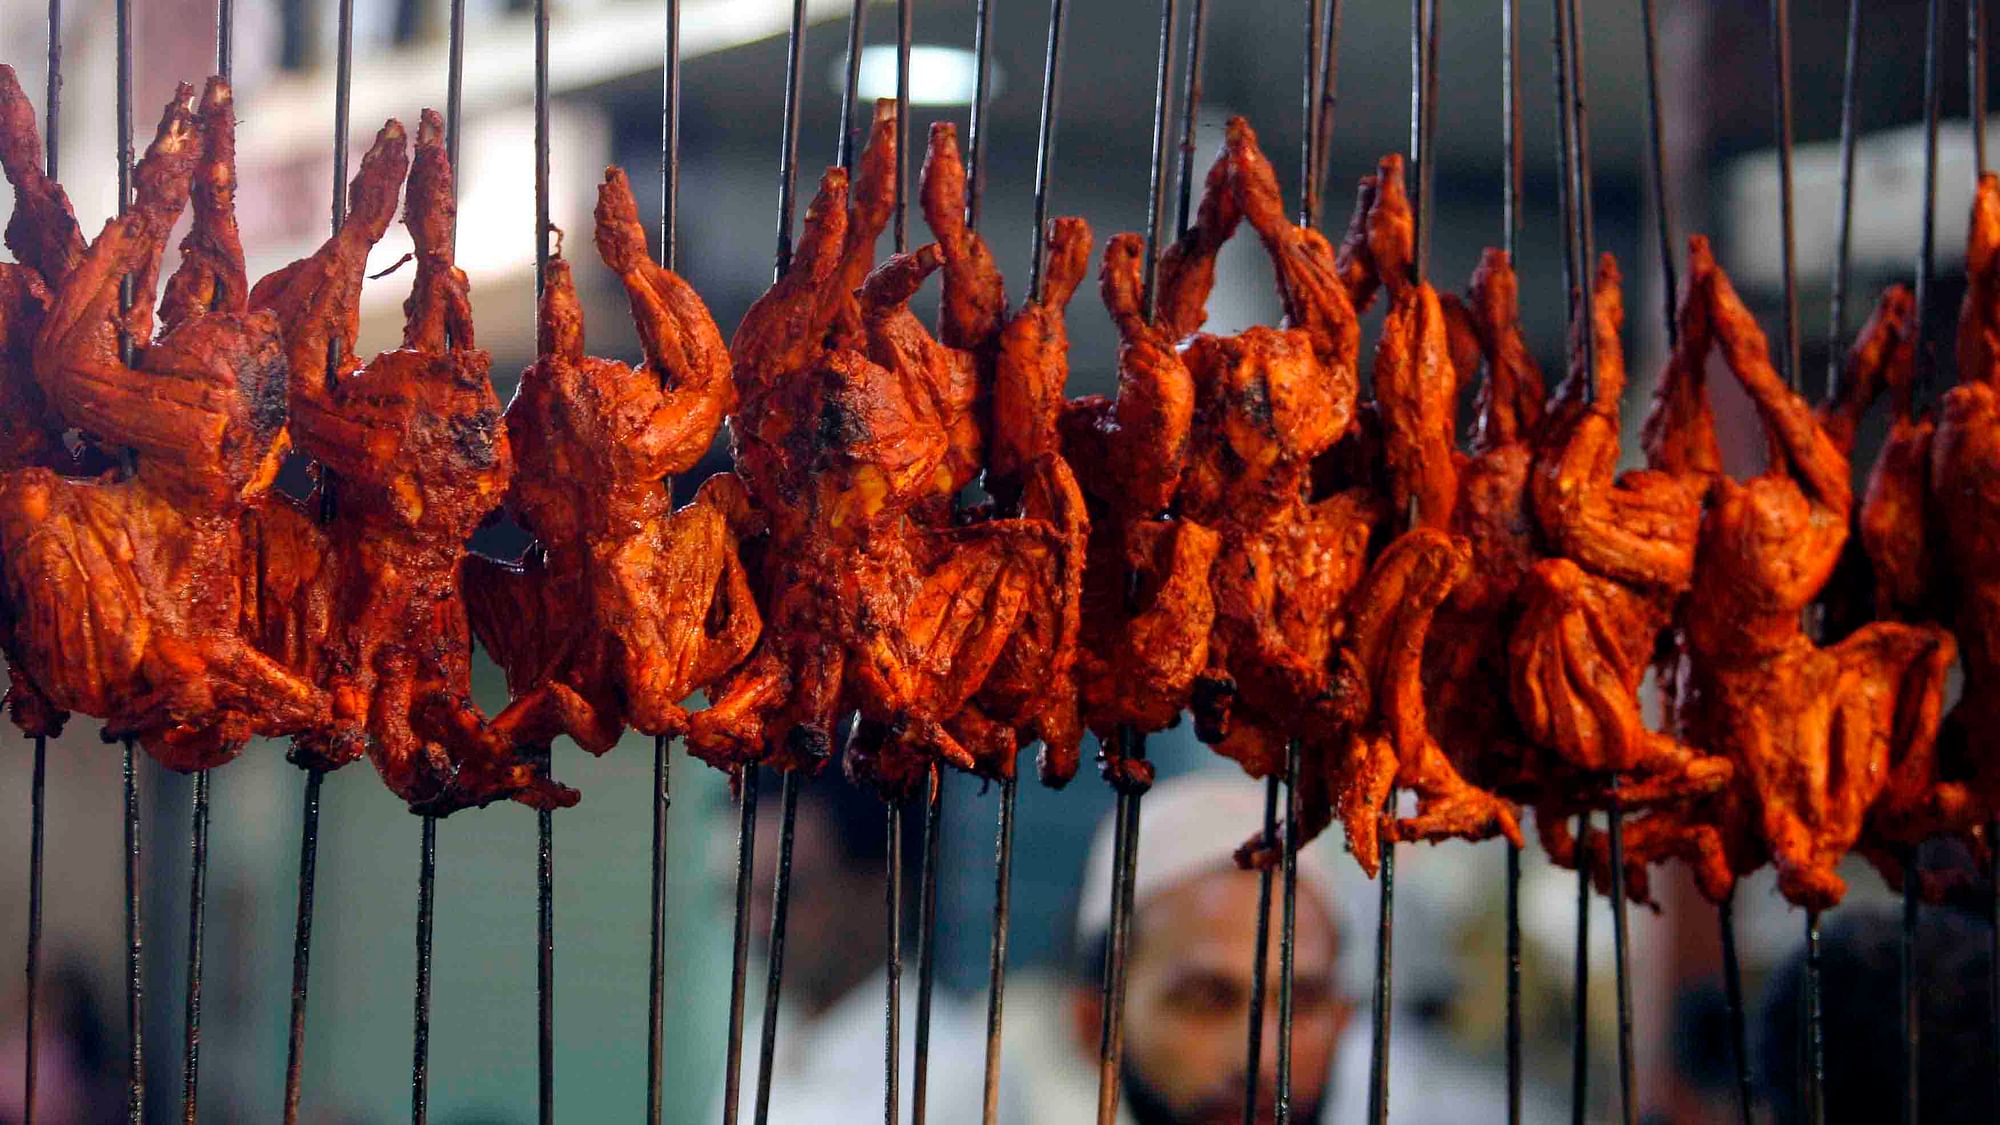 Skewered chicken being sold at an eatery in Mumbai (Photo: Reuters) 